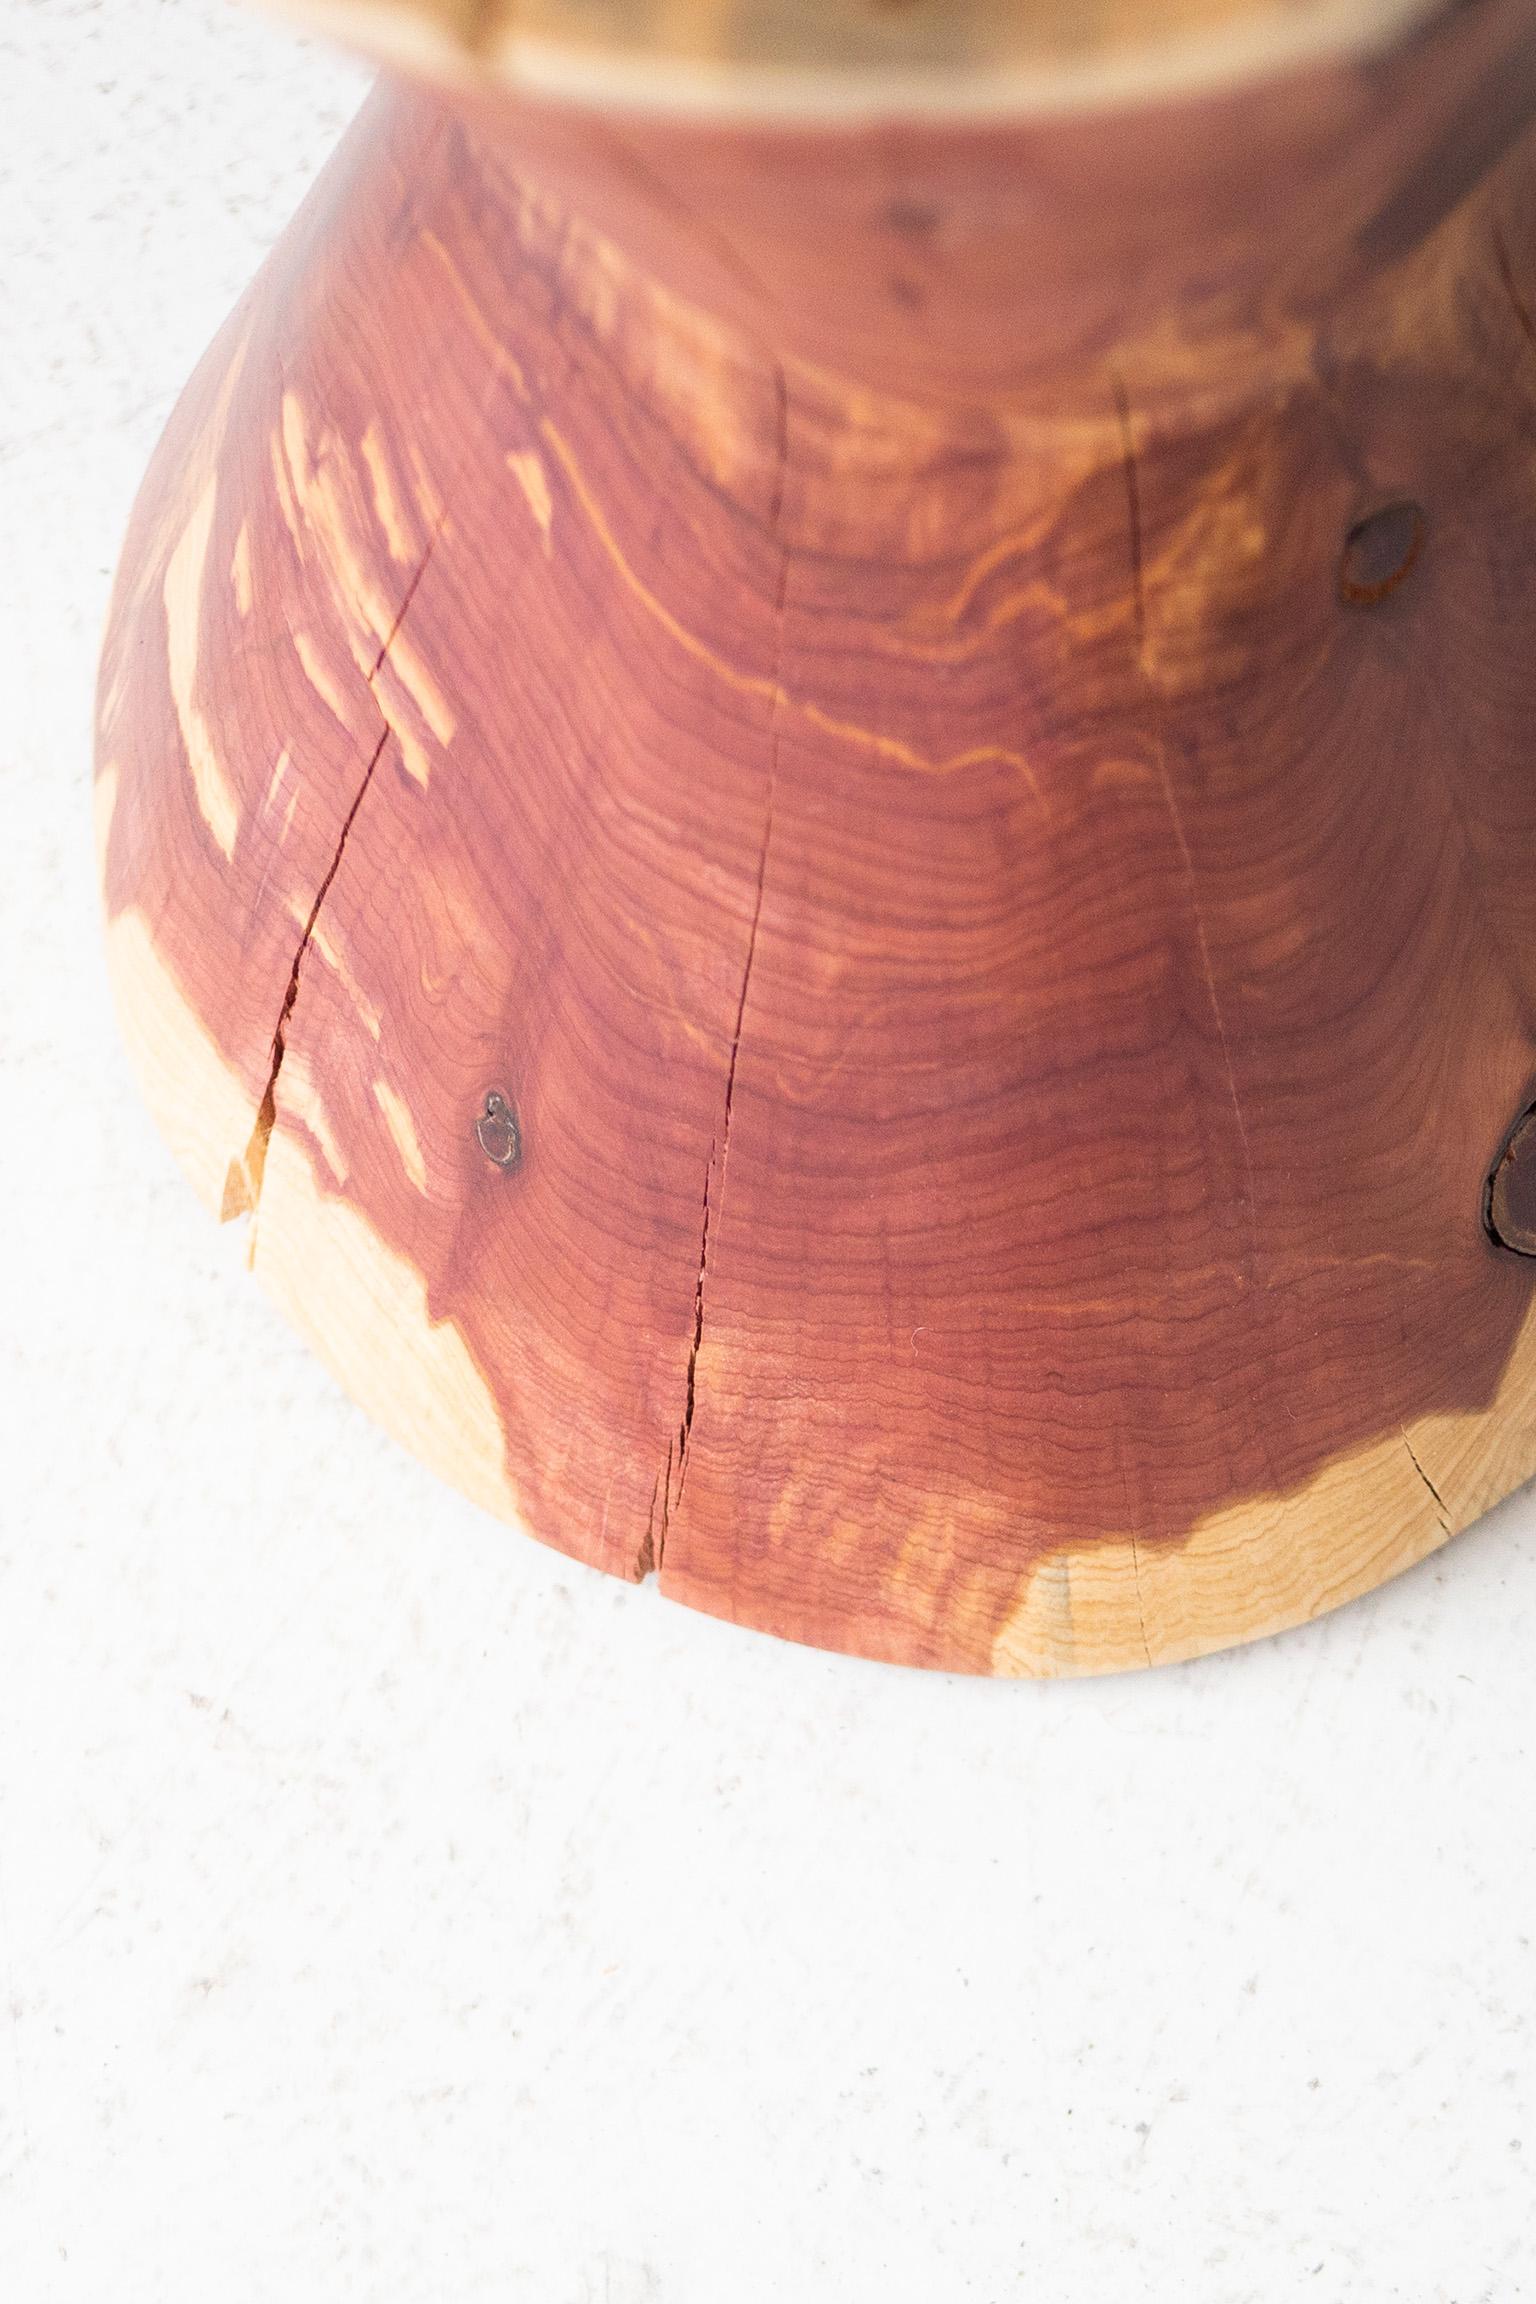 Cedar Sculpted Stump Table, The Hourglass For Sale